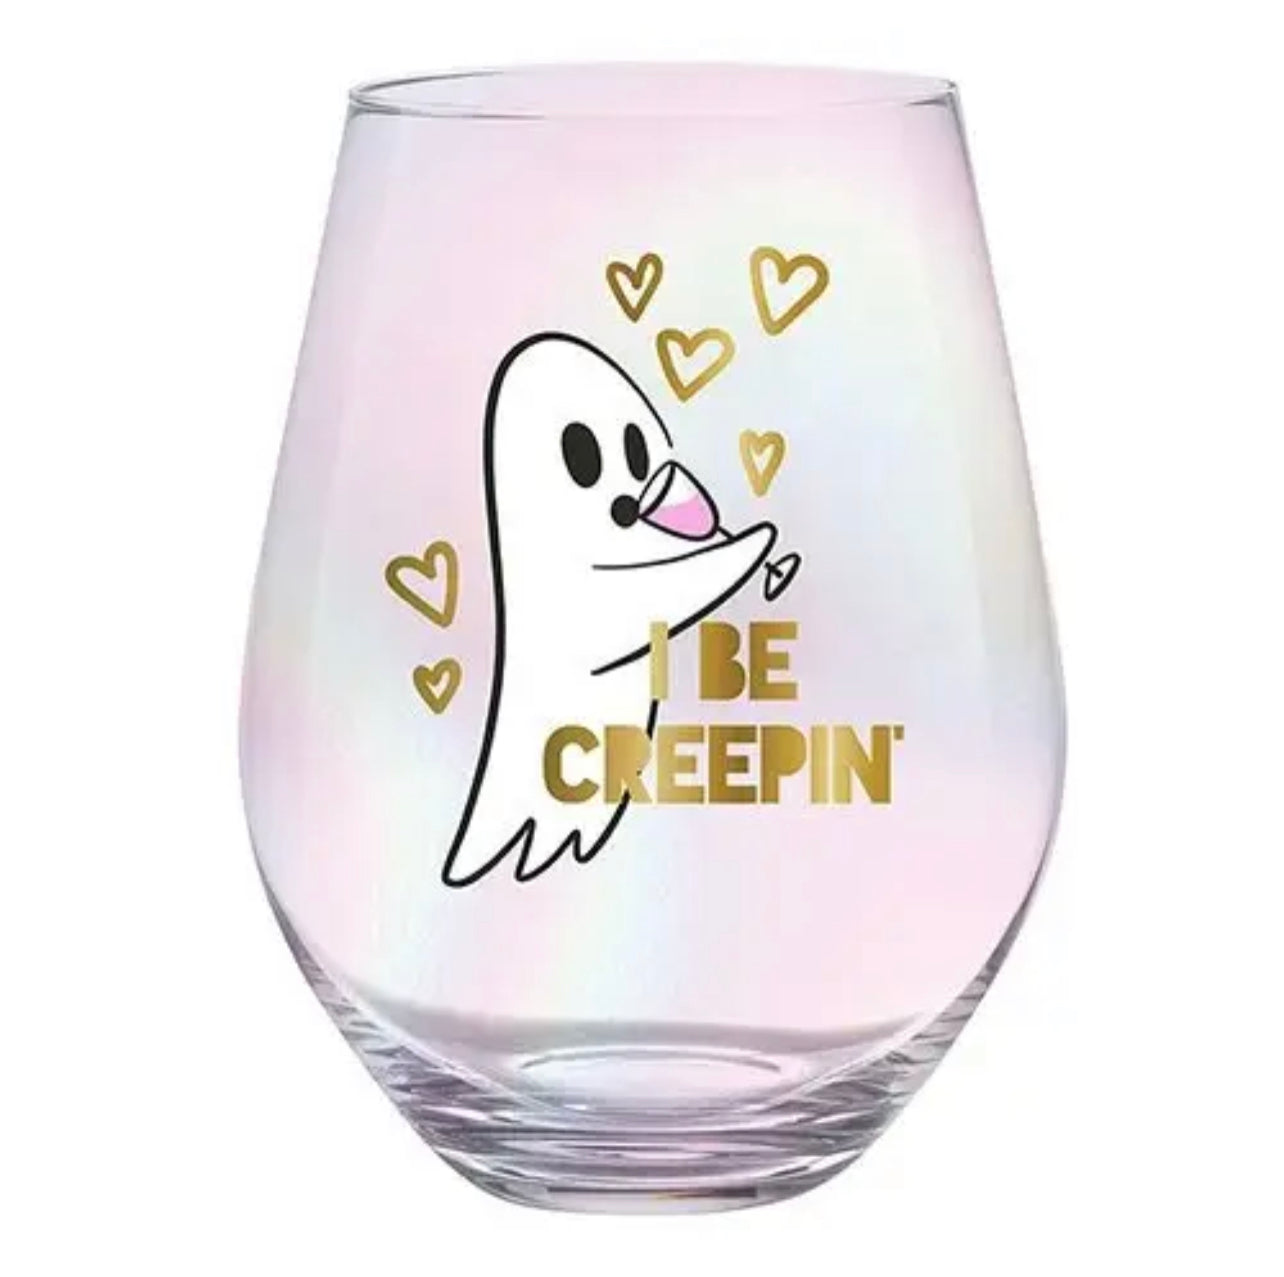 iridescent stemless wine glass featuring a ghost drinking from a wine glass surrounded by gold hearts and words that say "I be creepin'" 